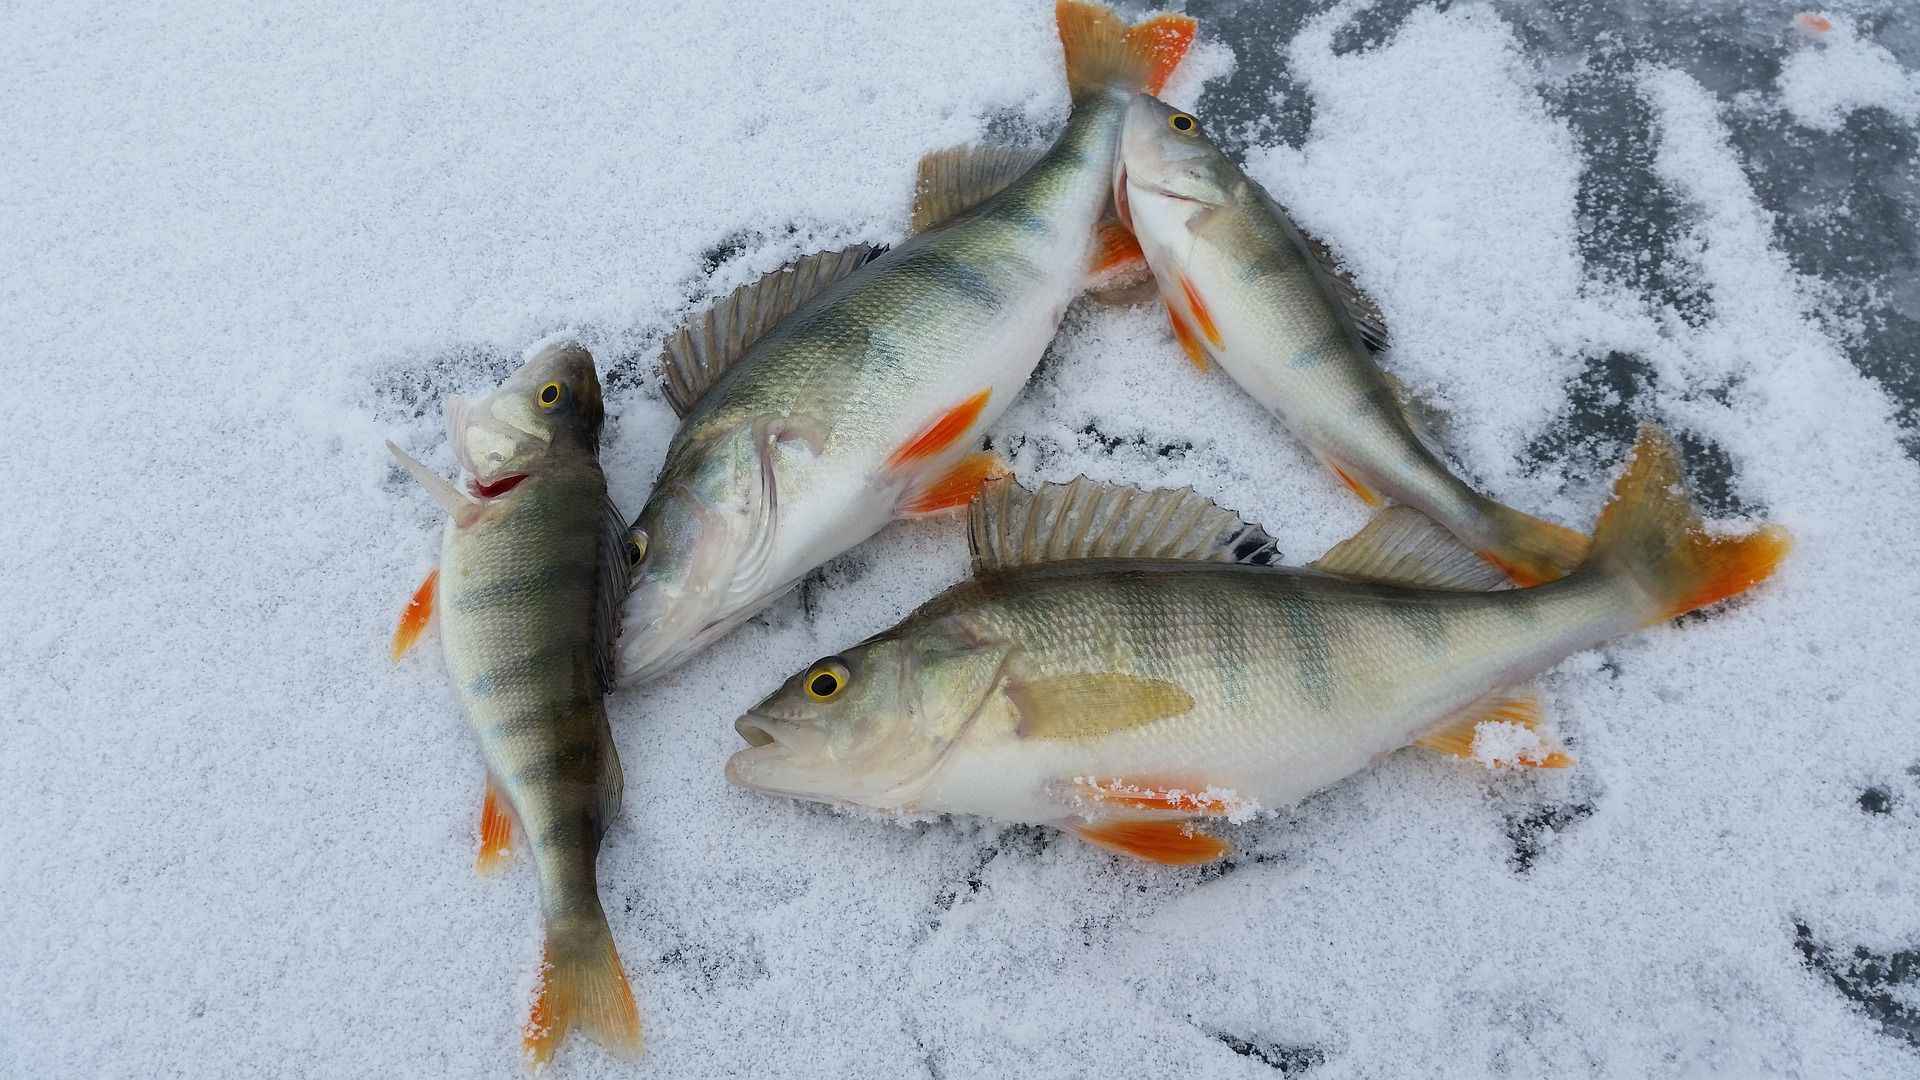 How to Catch Largemouth Bass on the Ice this Winter